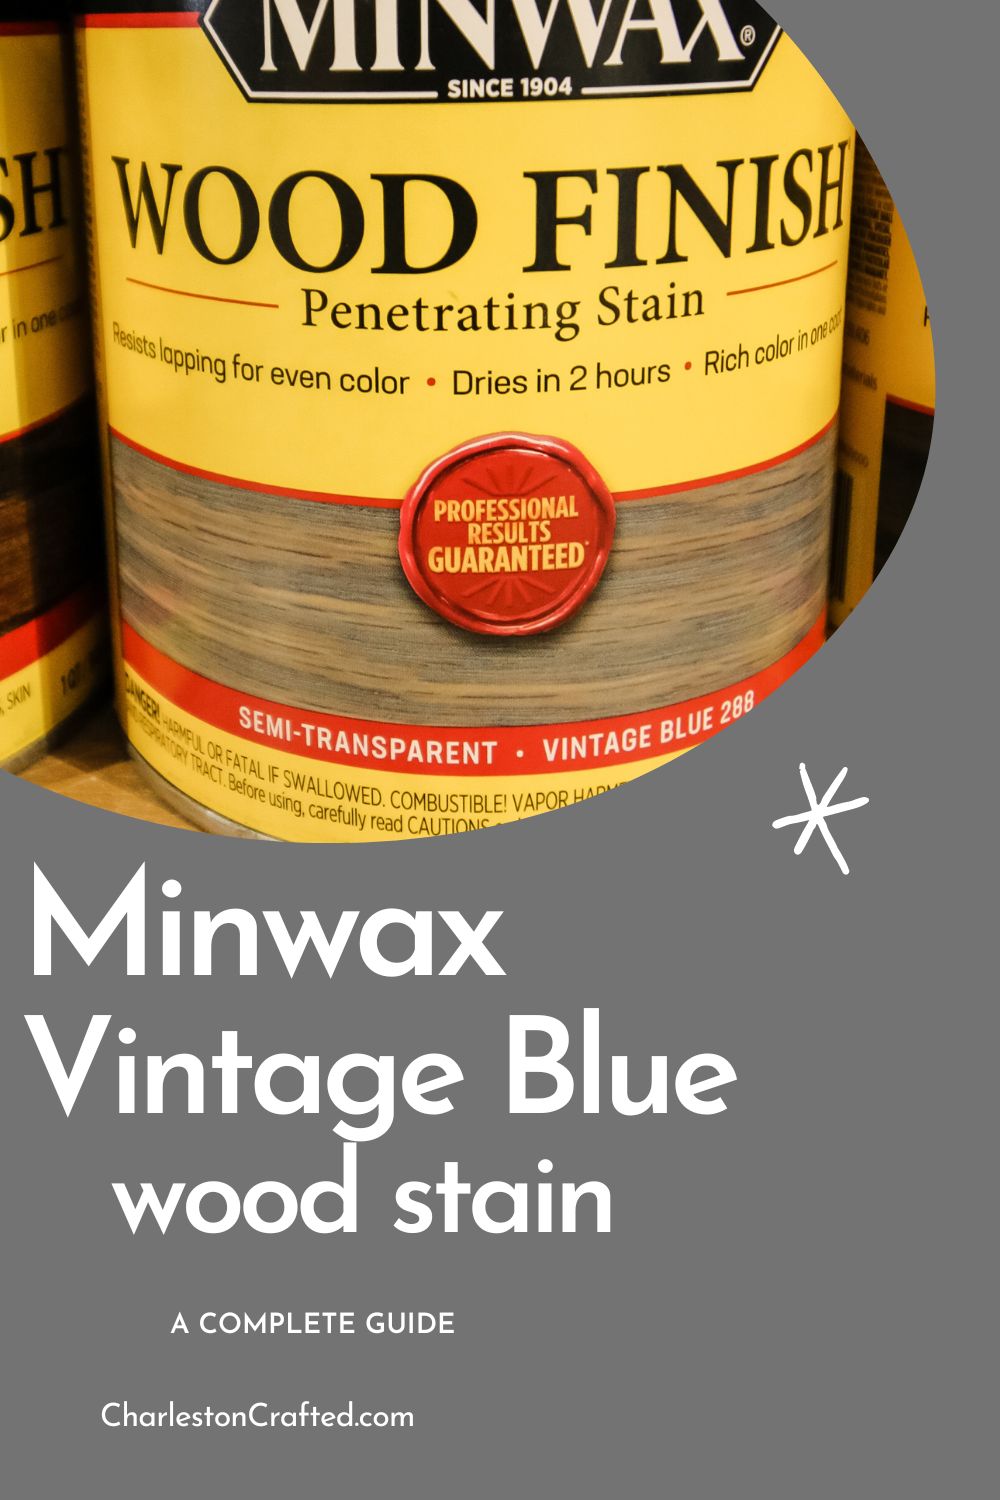 Nell Hill's - Have you ever seen a blue wood stain? Instead of a